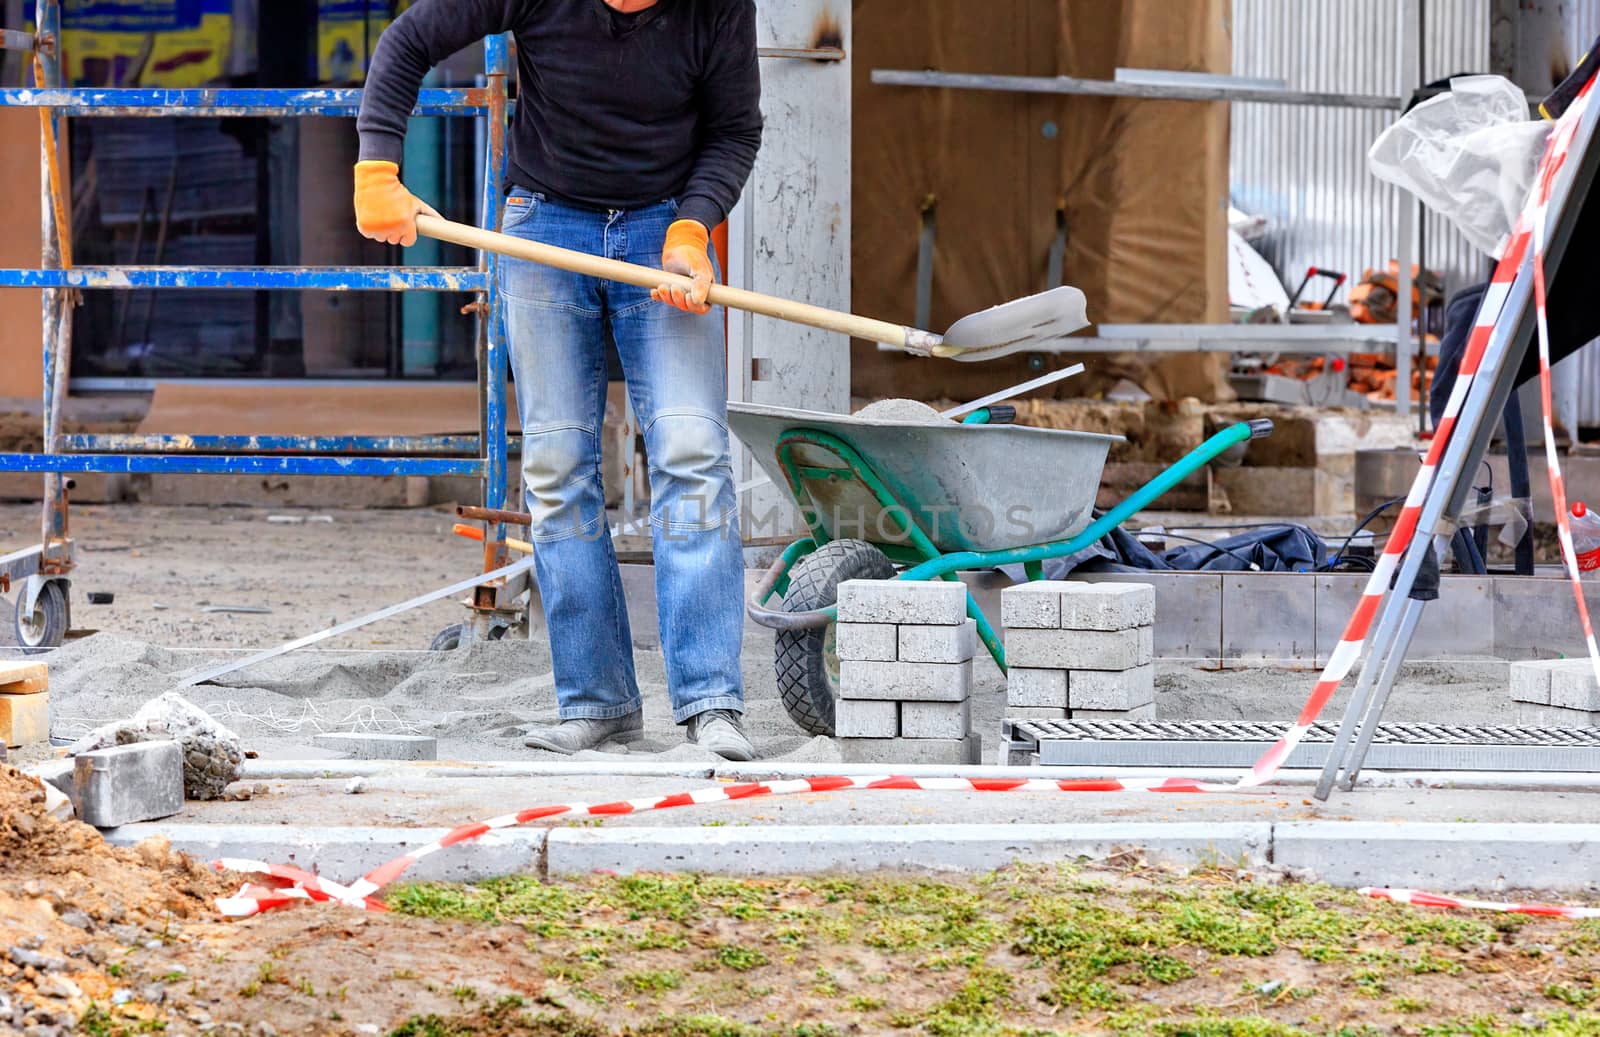 A worker levels the foundation with sand and cement using a shovel from a construction trolley for laying paving slabs against the background of a prepared site for work.